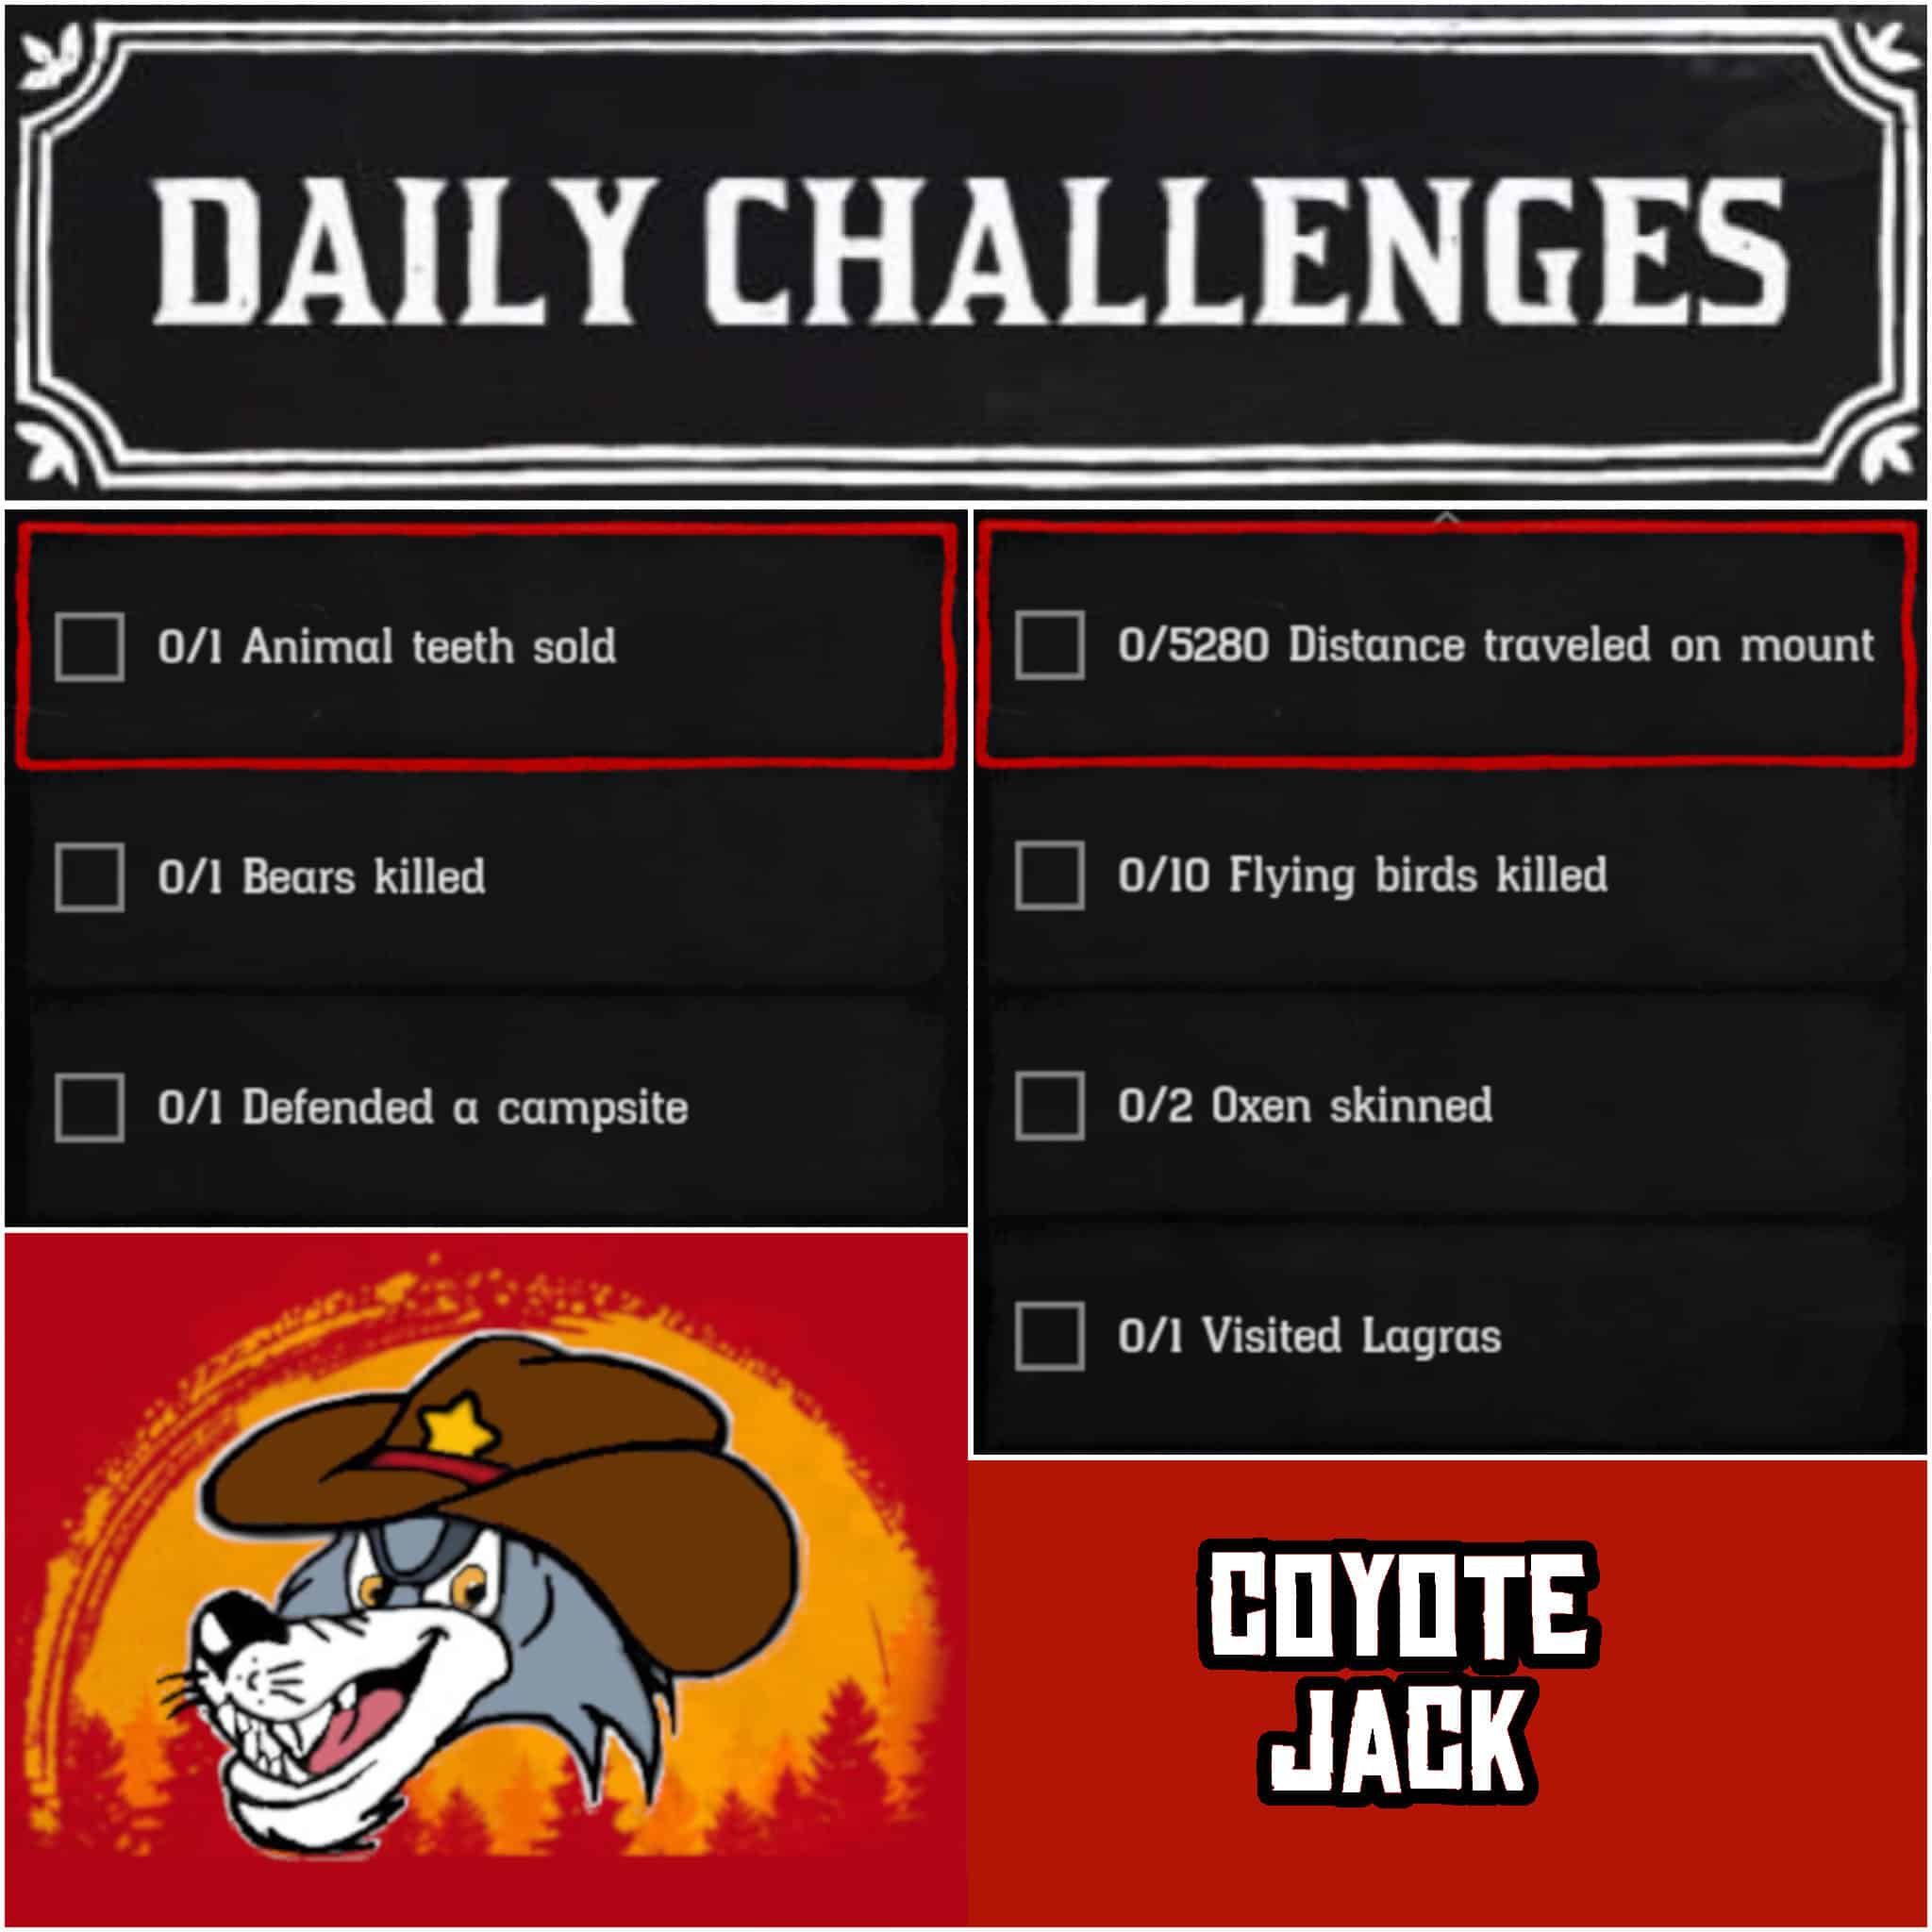 You are currently viewing Wednesday 30 December Daily Challenges